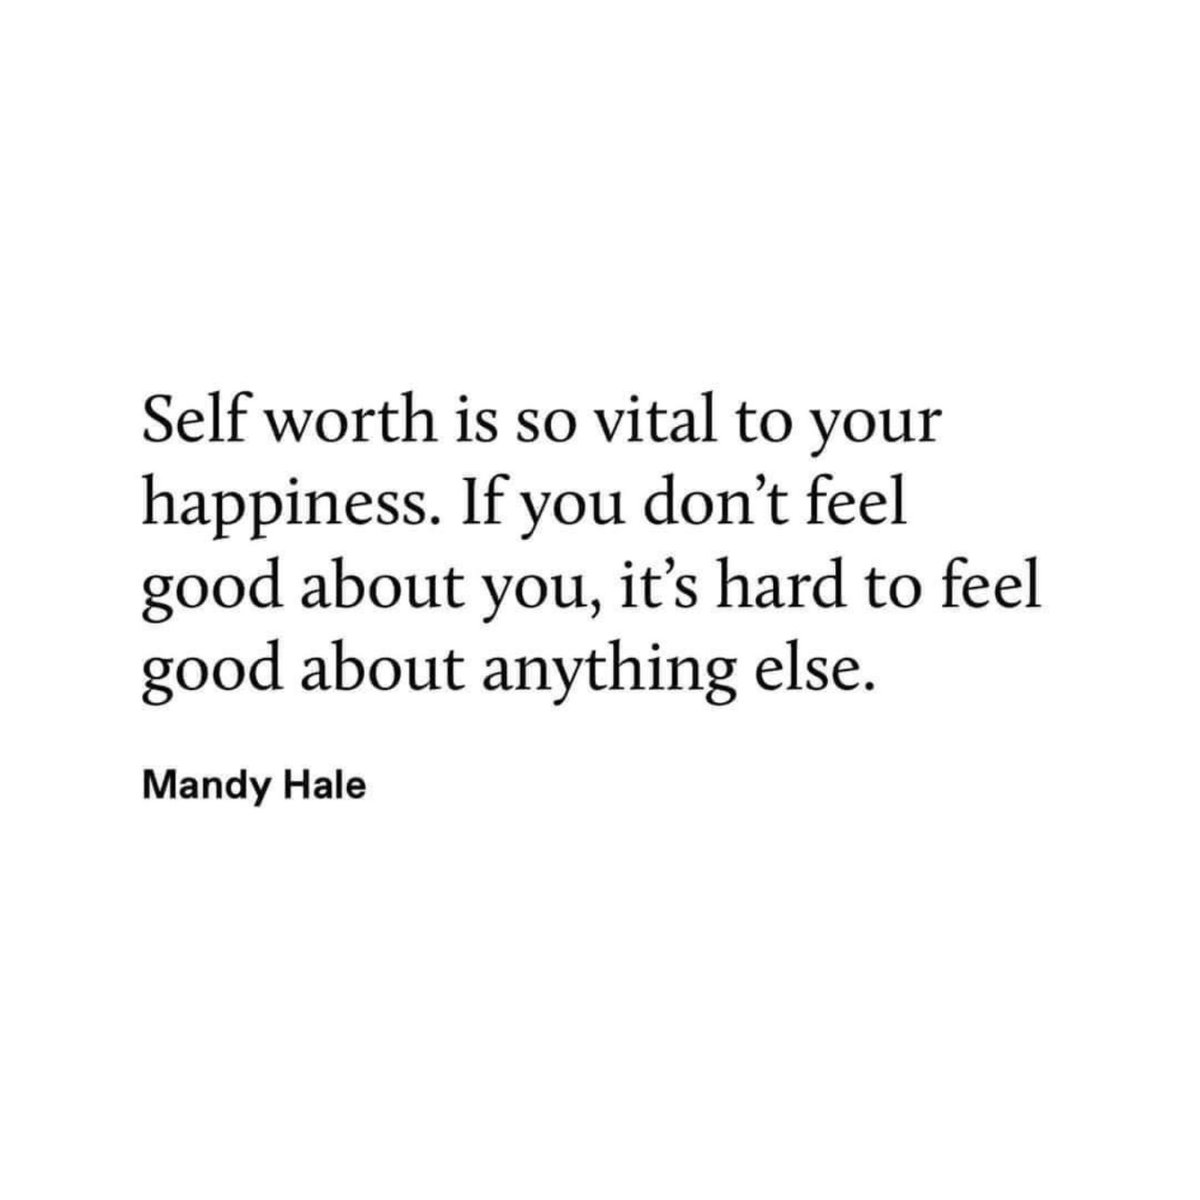 Self Worth Is A Must To Be Happy & Successful In This World Fam Fr ‼️💯
#MTGang🎙#MagnificentMonday #MorningMotivation #Motivation #MotivationalQuotes
#GetUp #Motivational #GoodMorning
#MotivationMonday #MotivationalMonday
#creategoodhabits #selfworthiseverything